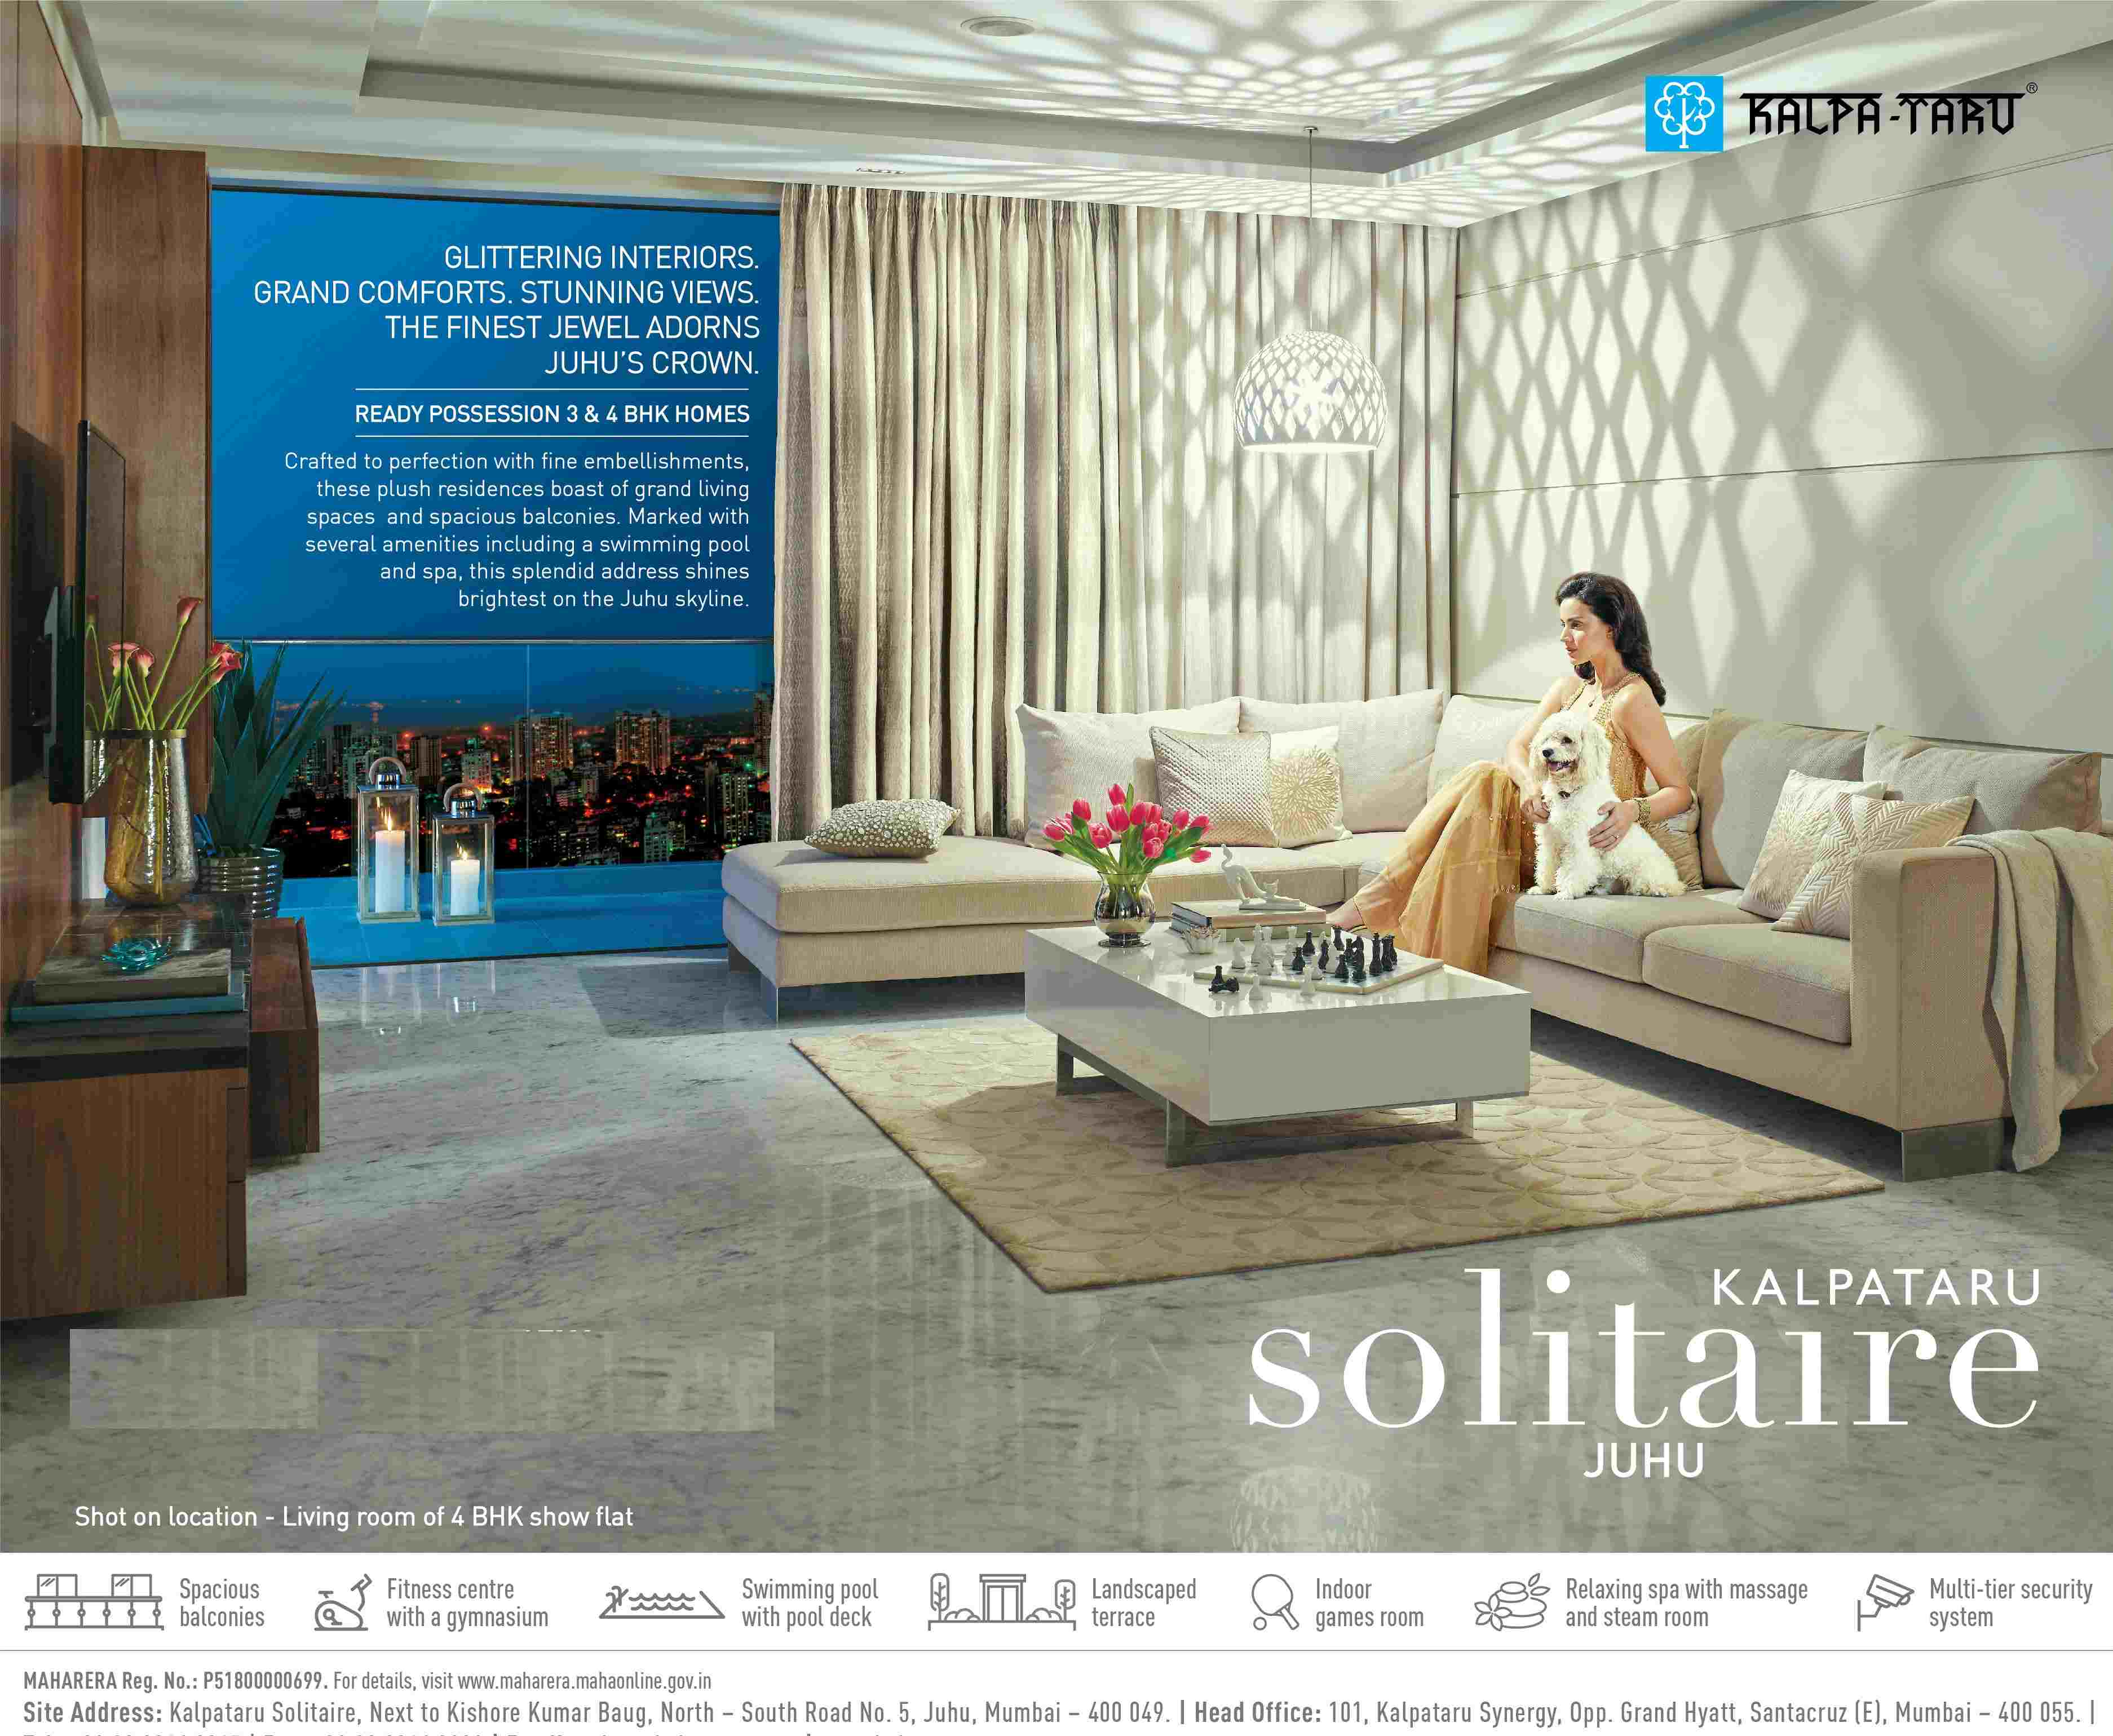 Book ready possession 3 & 4 BHK homes at Kalpataru Solitaire in Mumbai Update